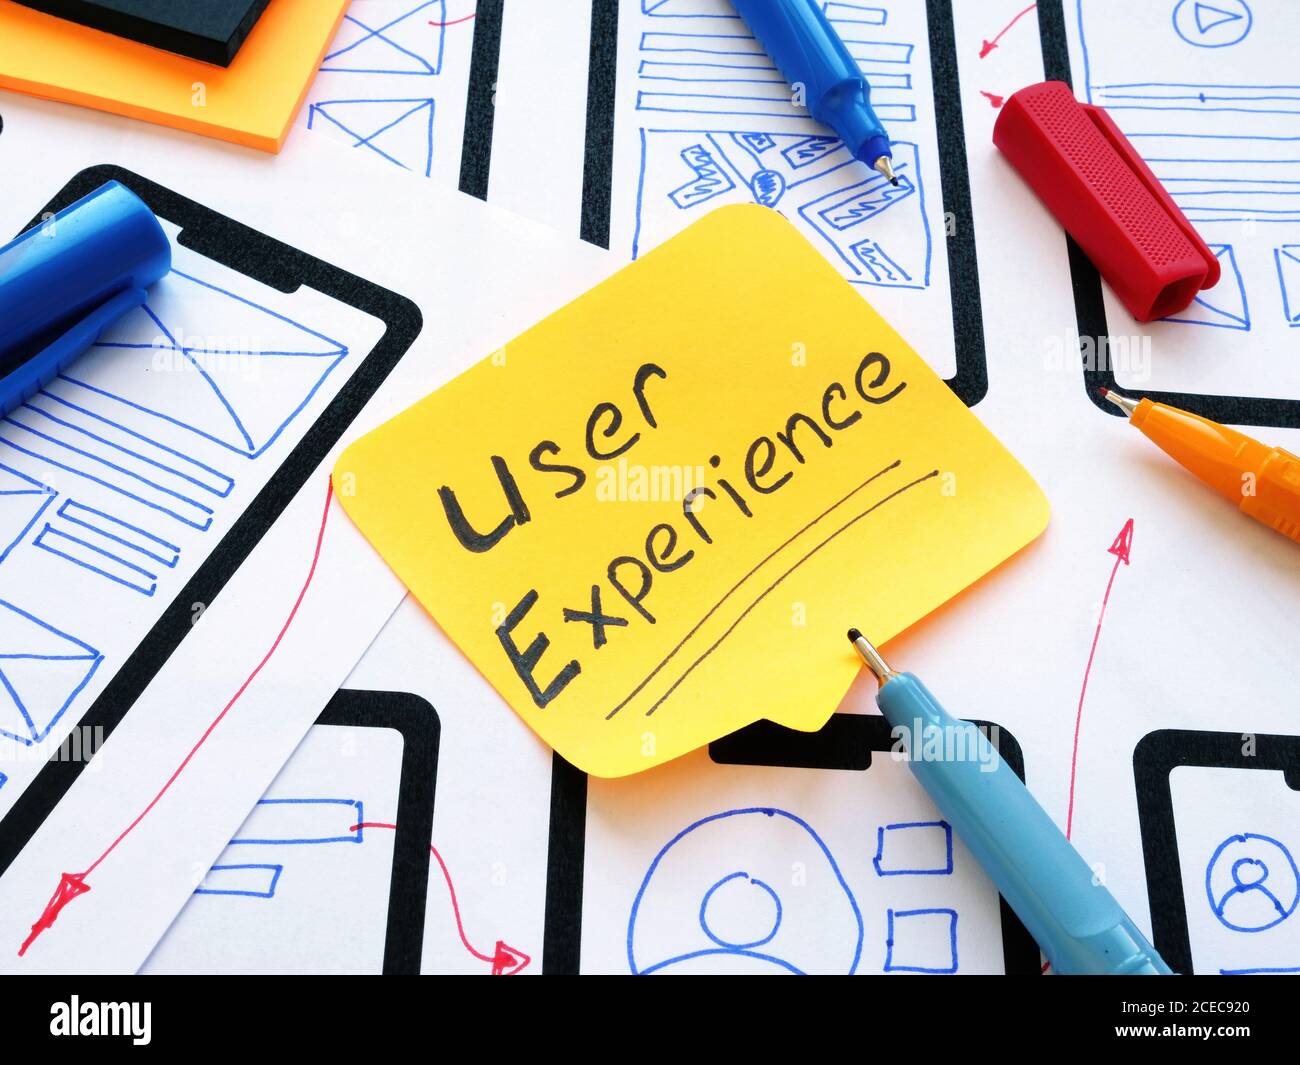 UX user experience inscription and sketches of the mobile application. Stock Photo